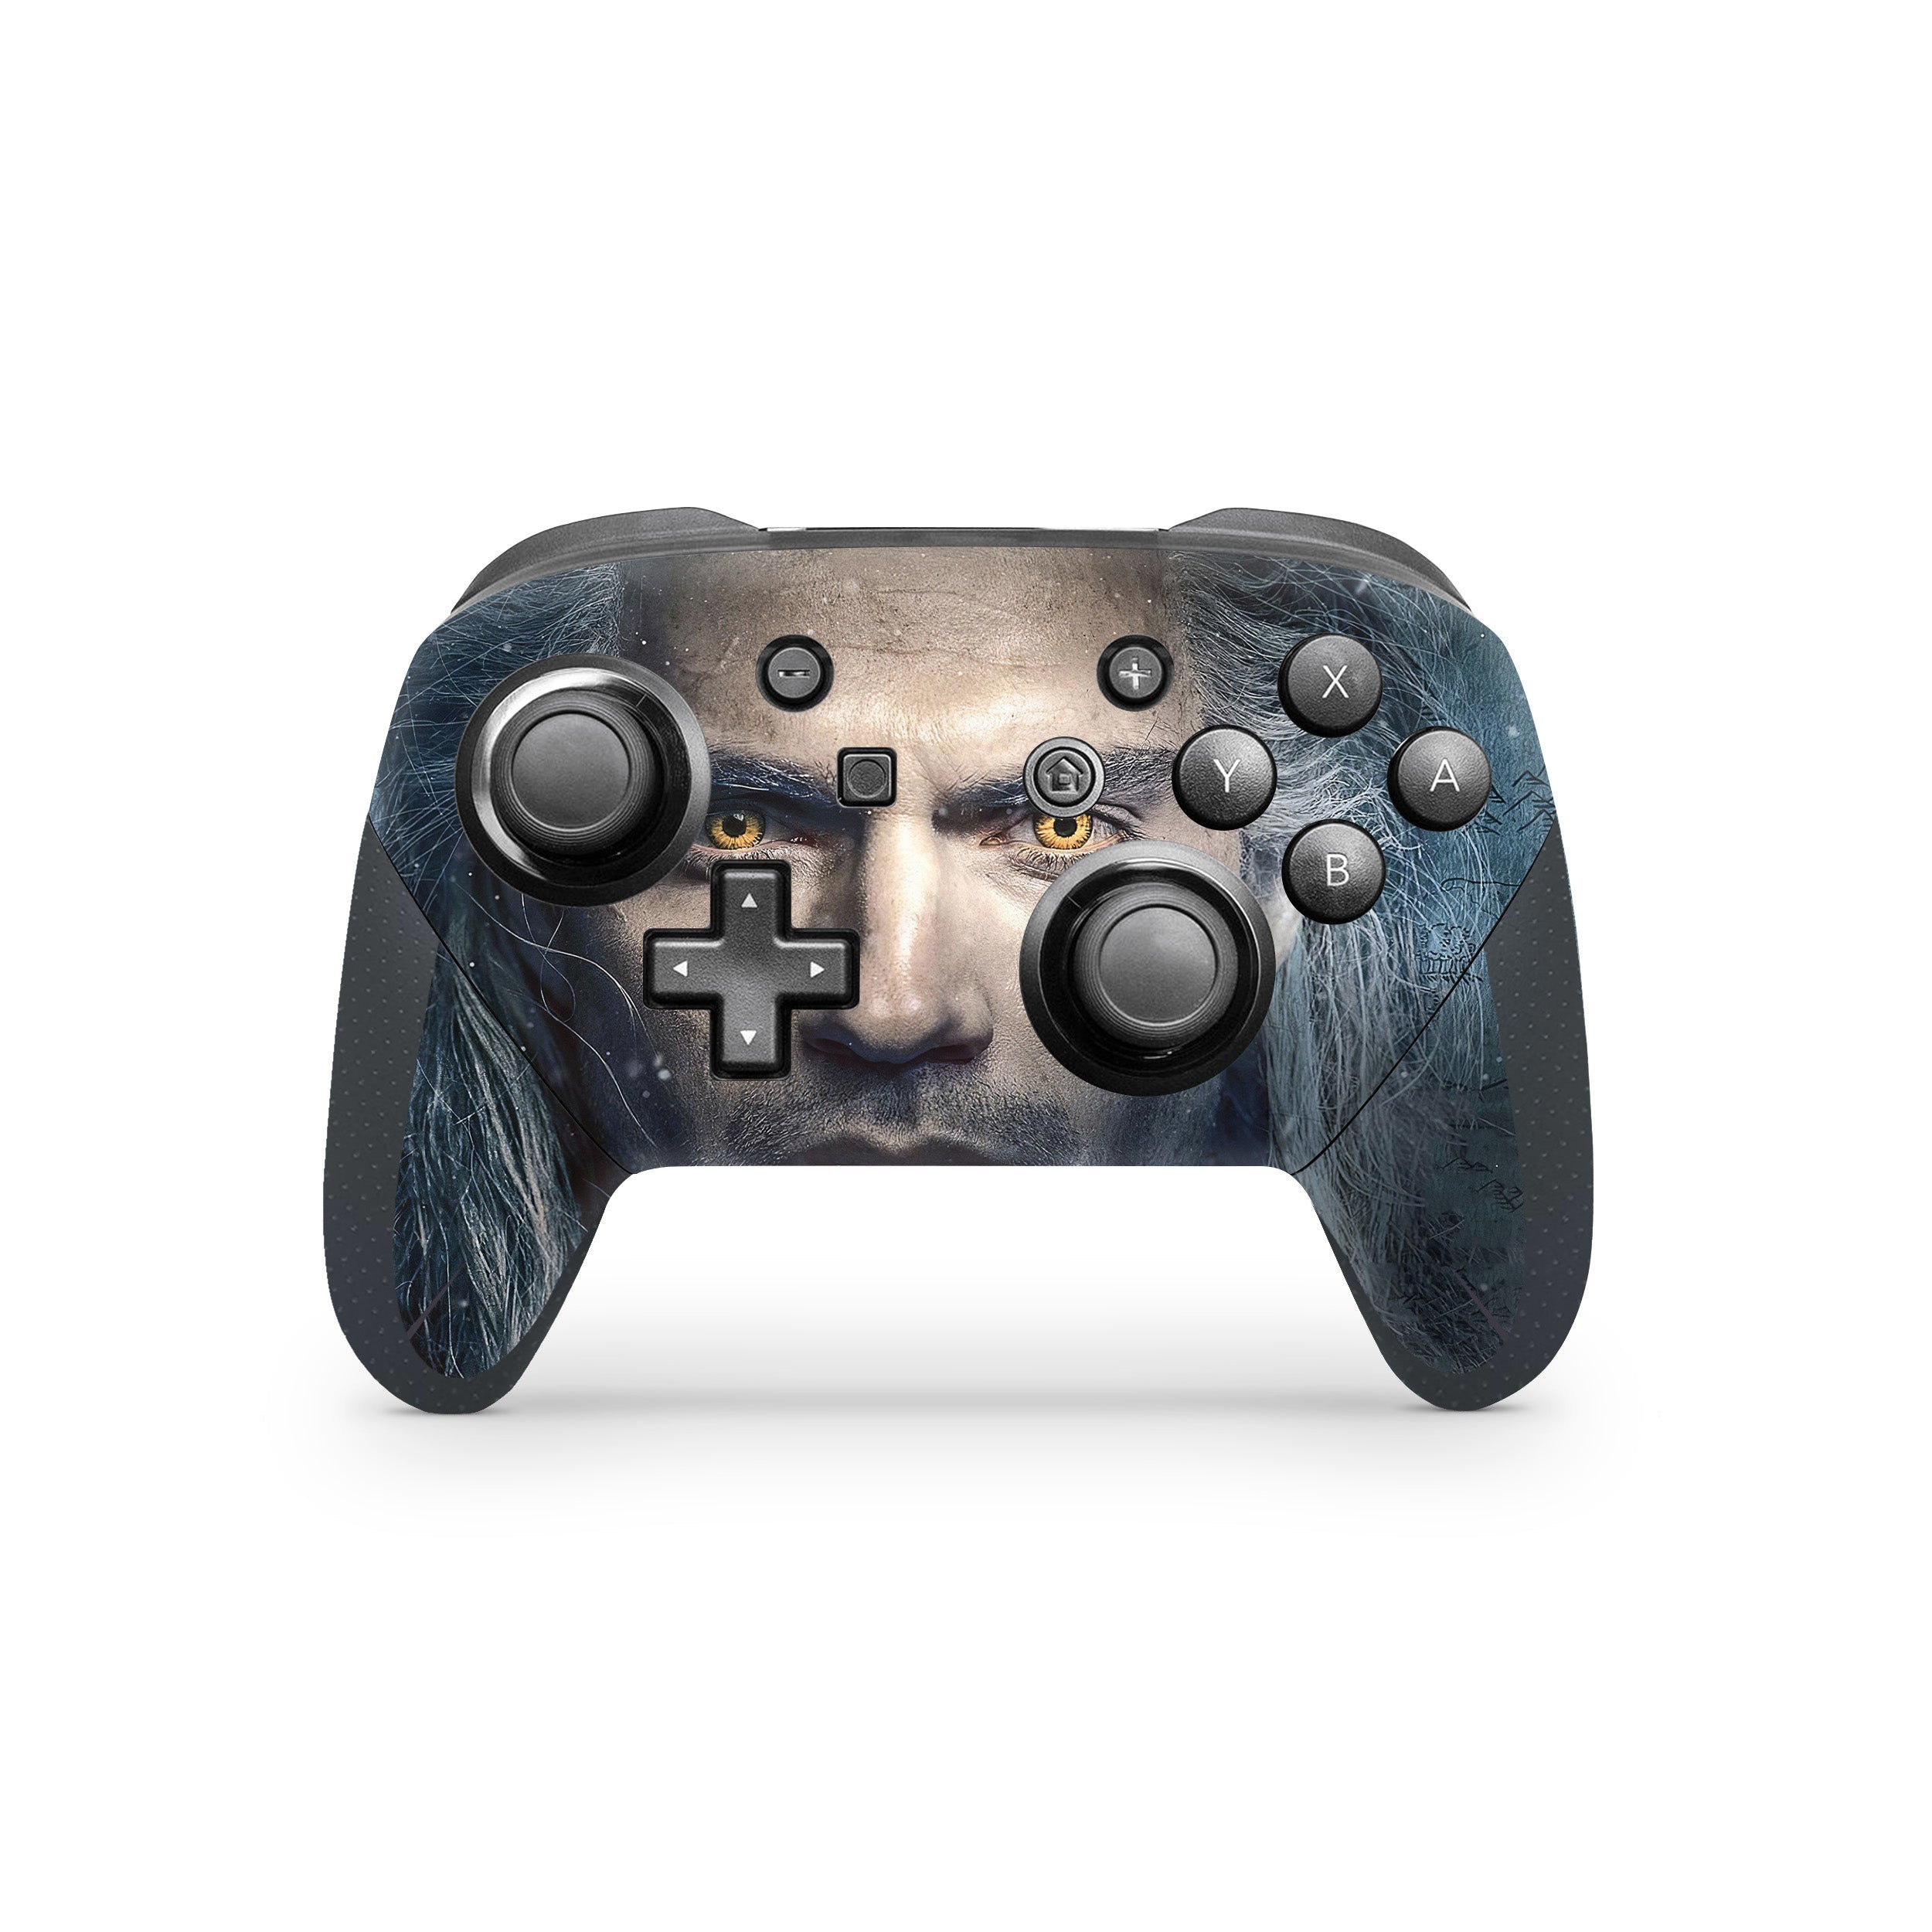 A video game skin featuring a The Witcher design for the Switch Pro Controller.